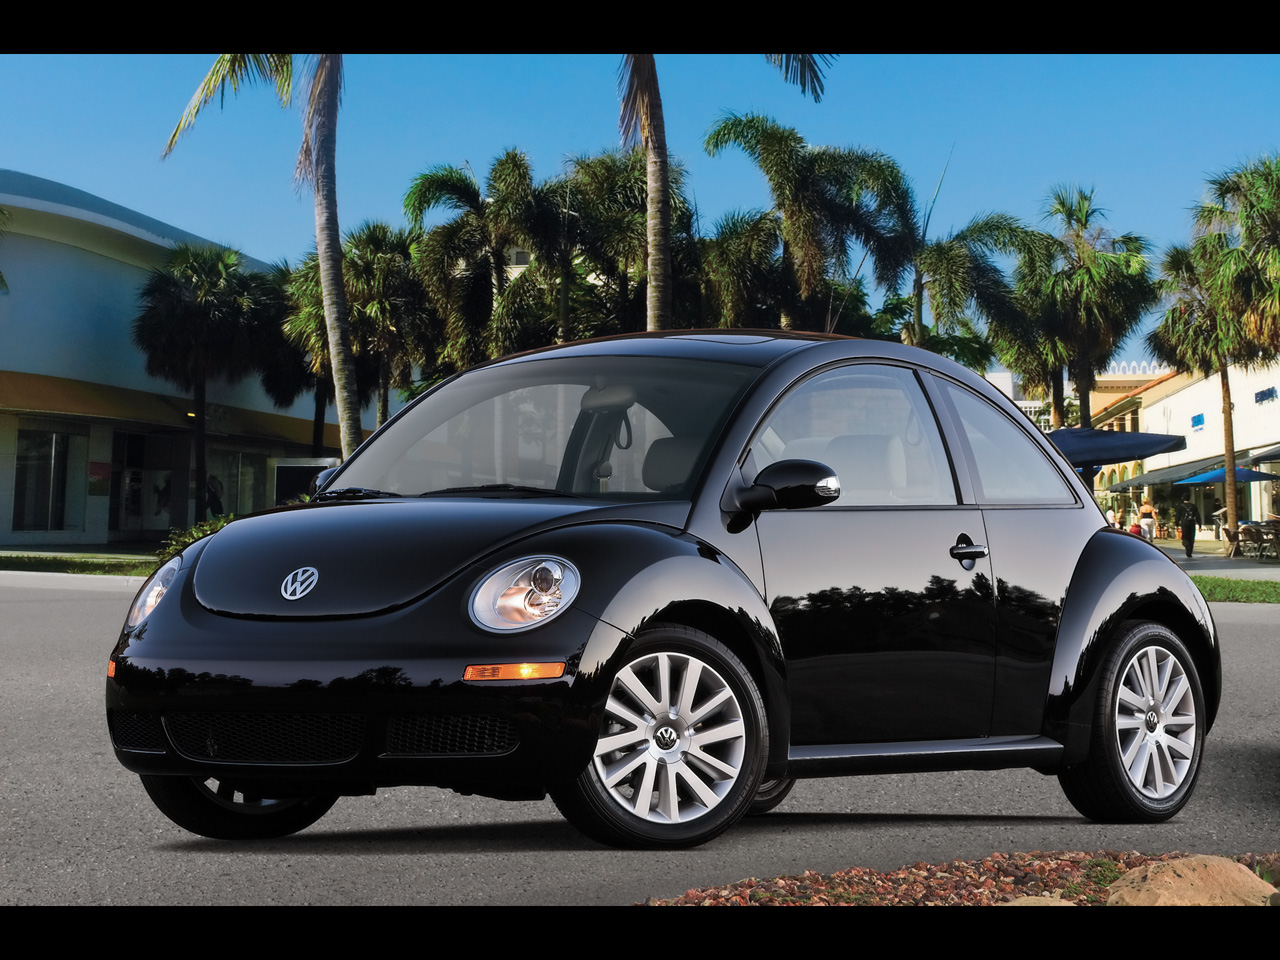 Indonesia cars: Volkswagen New Beetle comes another year in Indonesia 